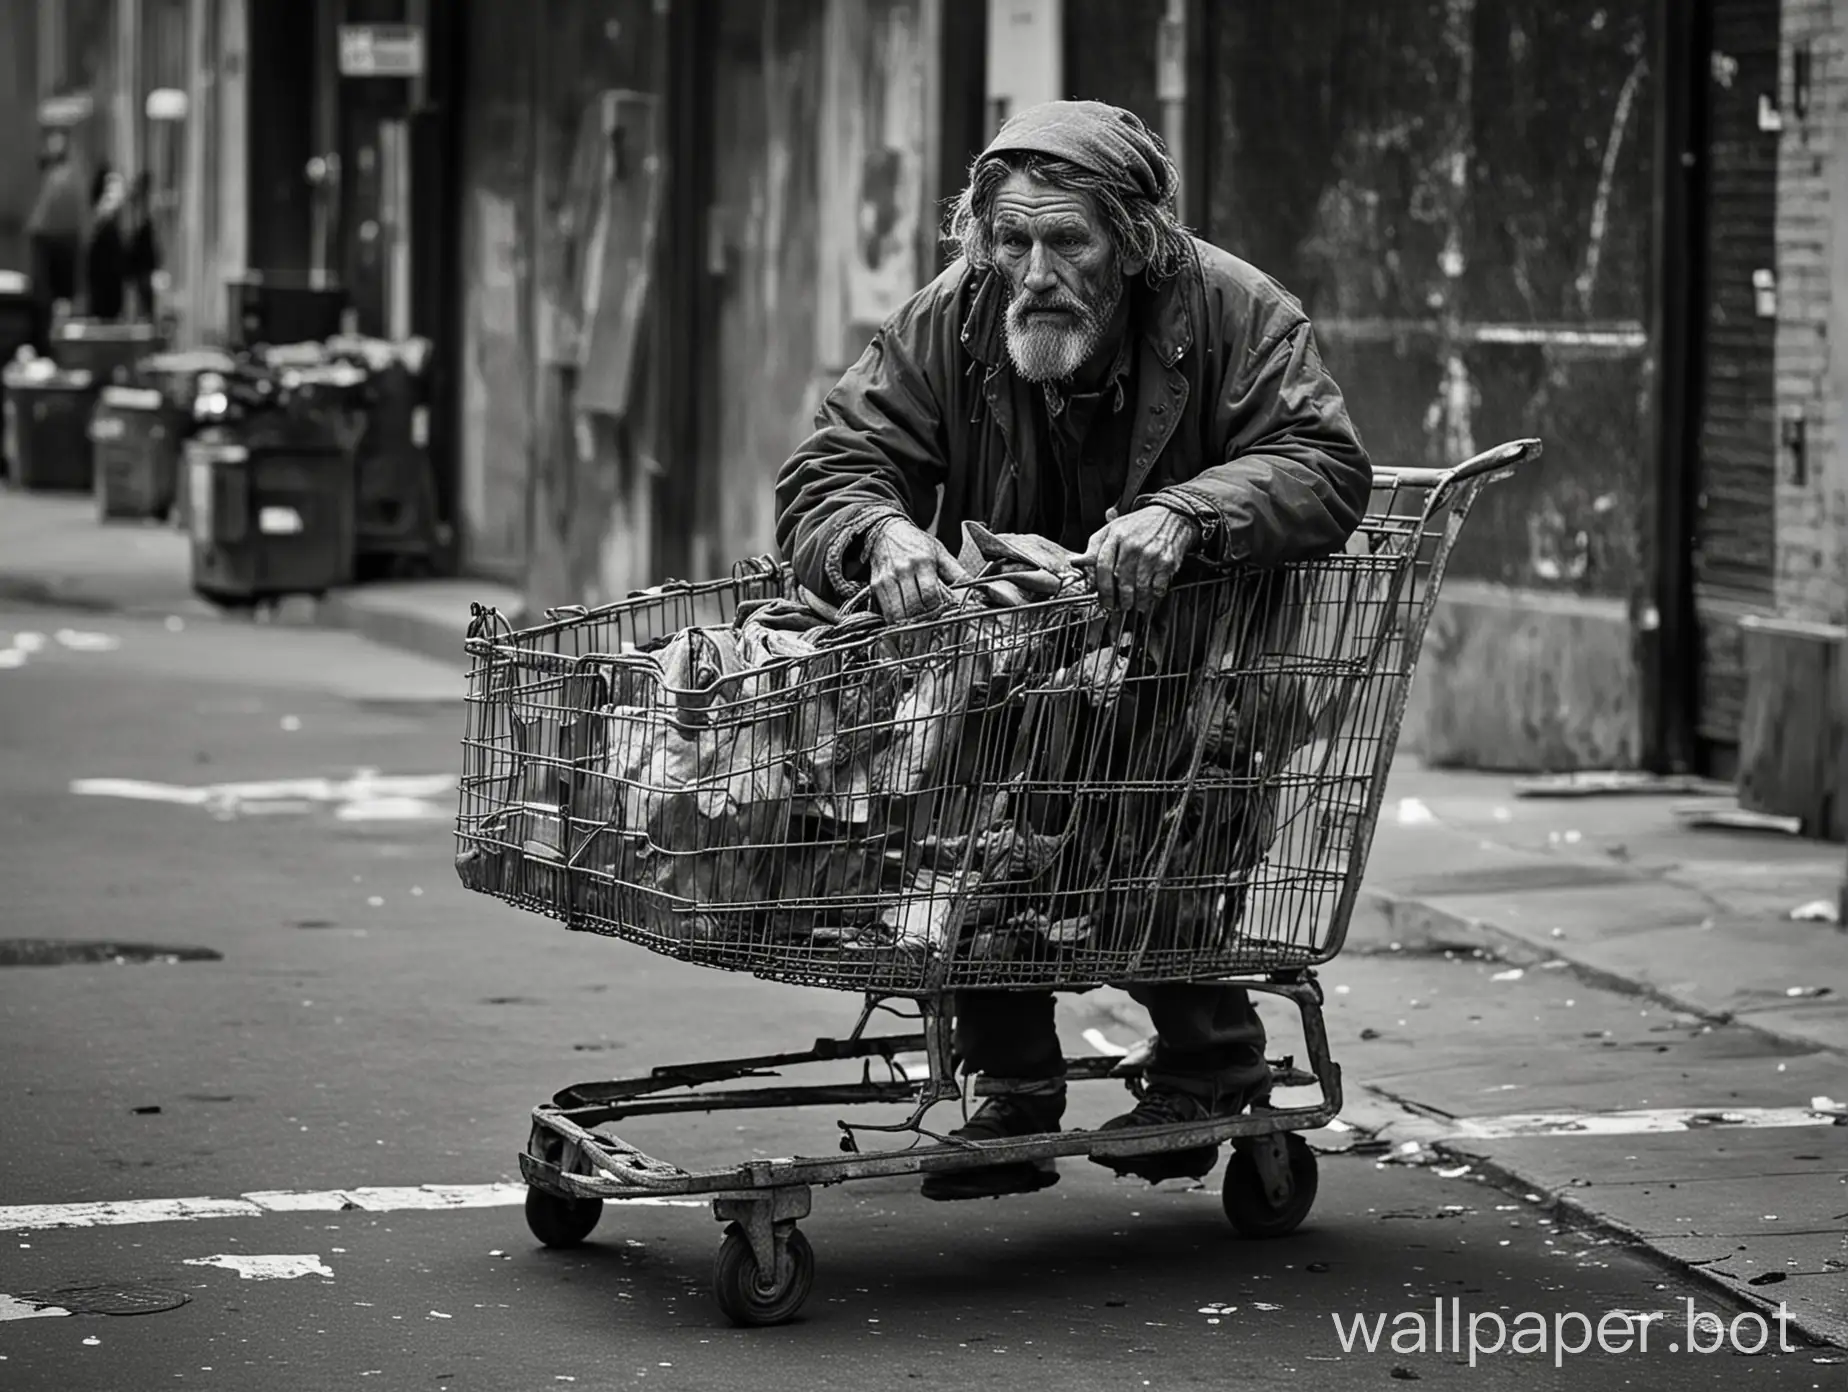 Despairing-Homeless-Man-in-New-York-City-with-Shopping-Cart